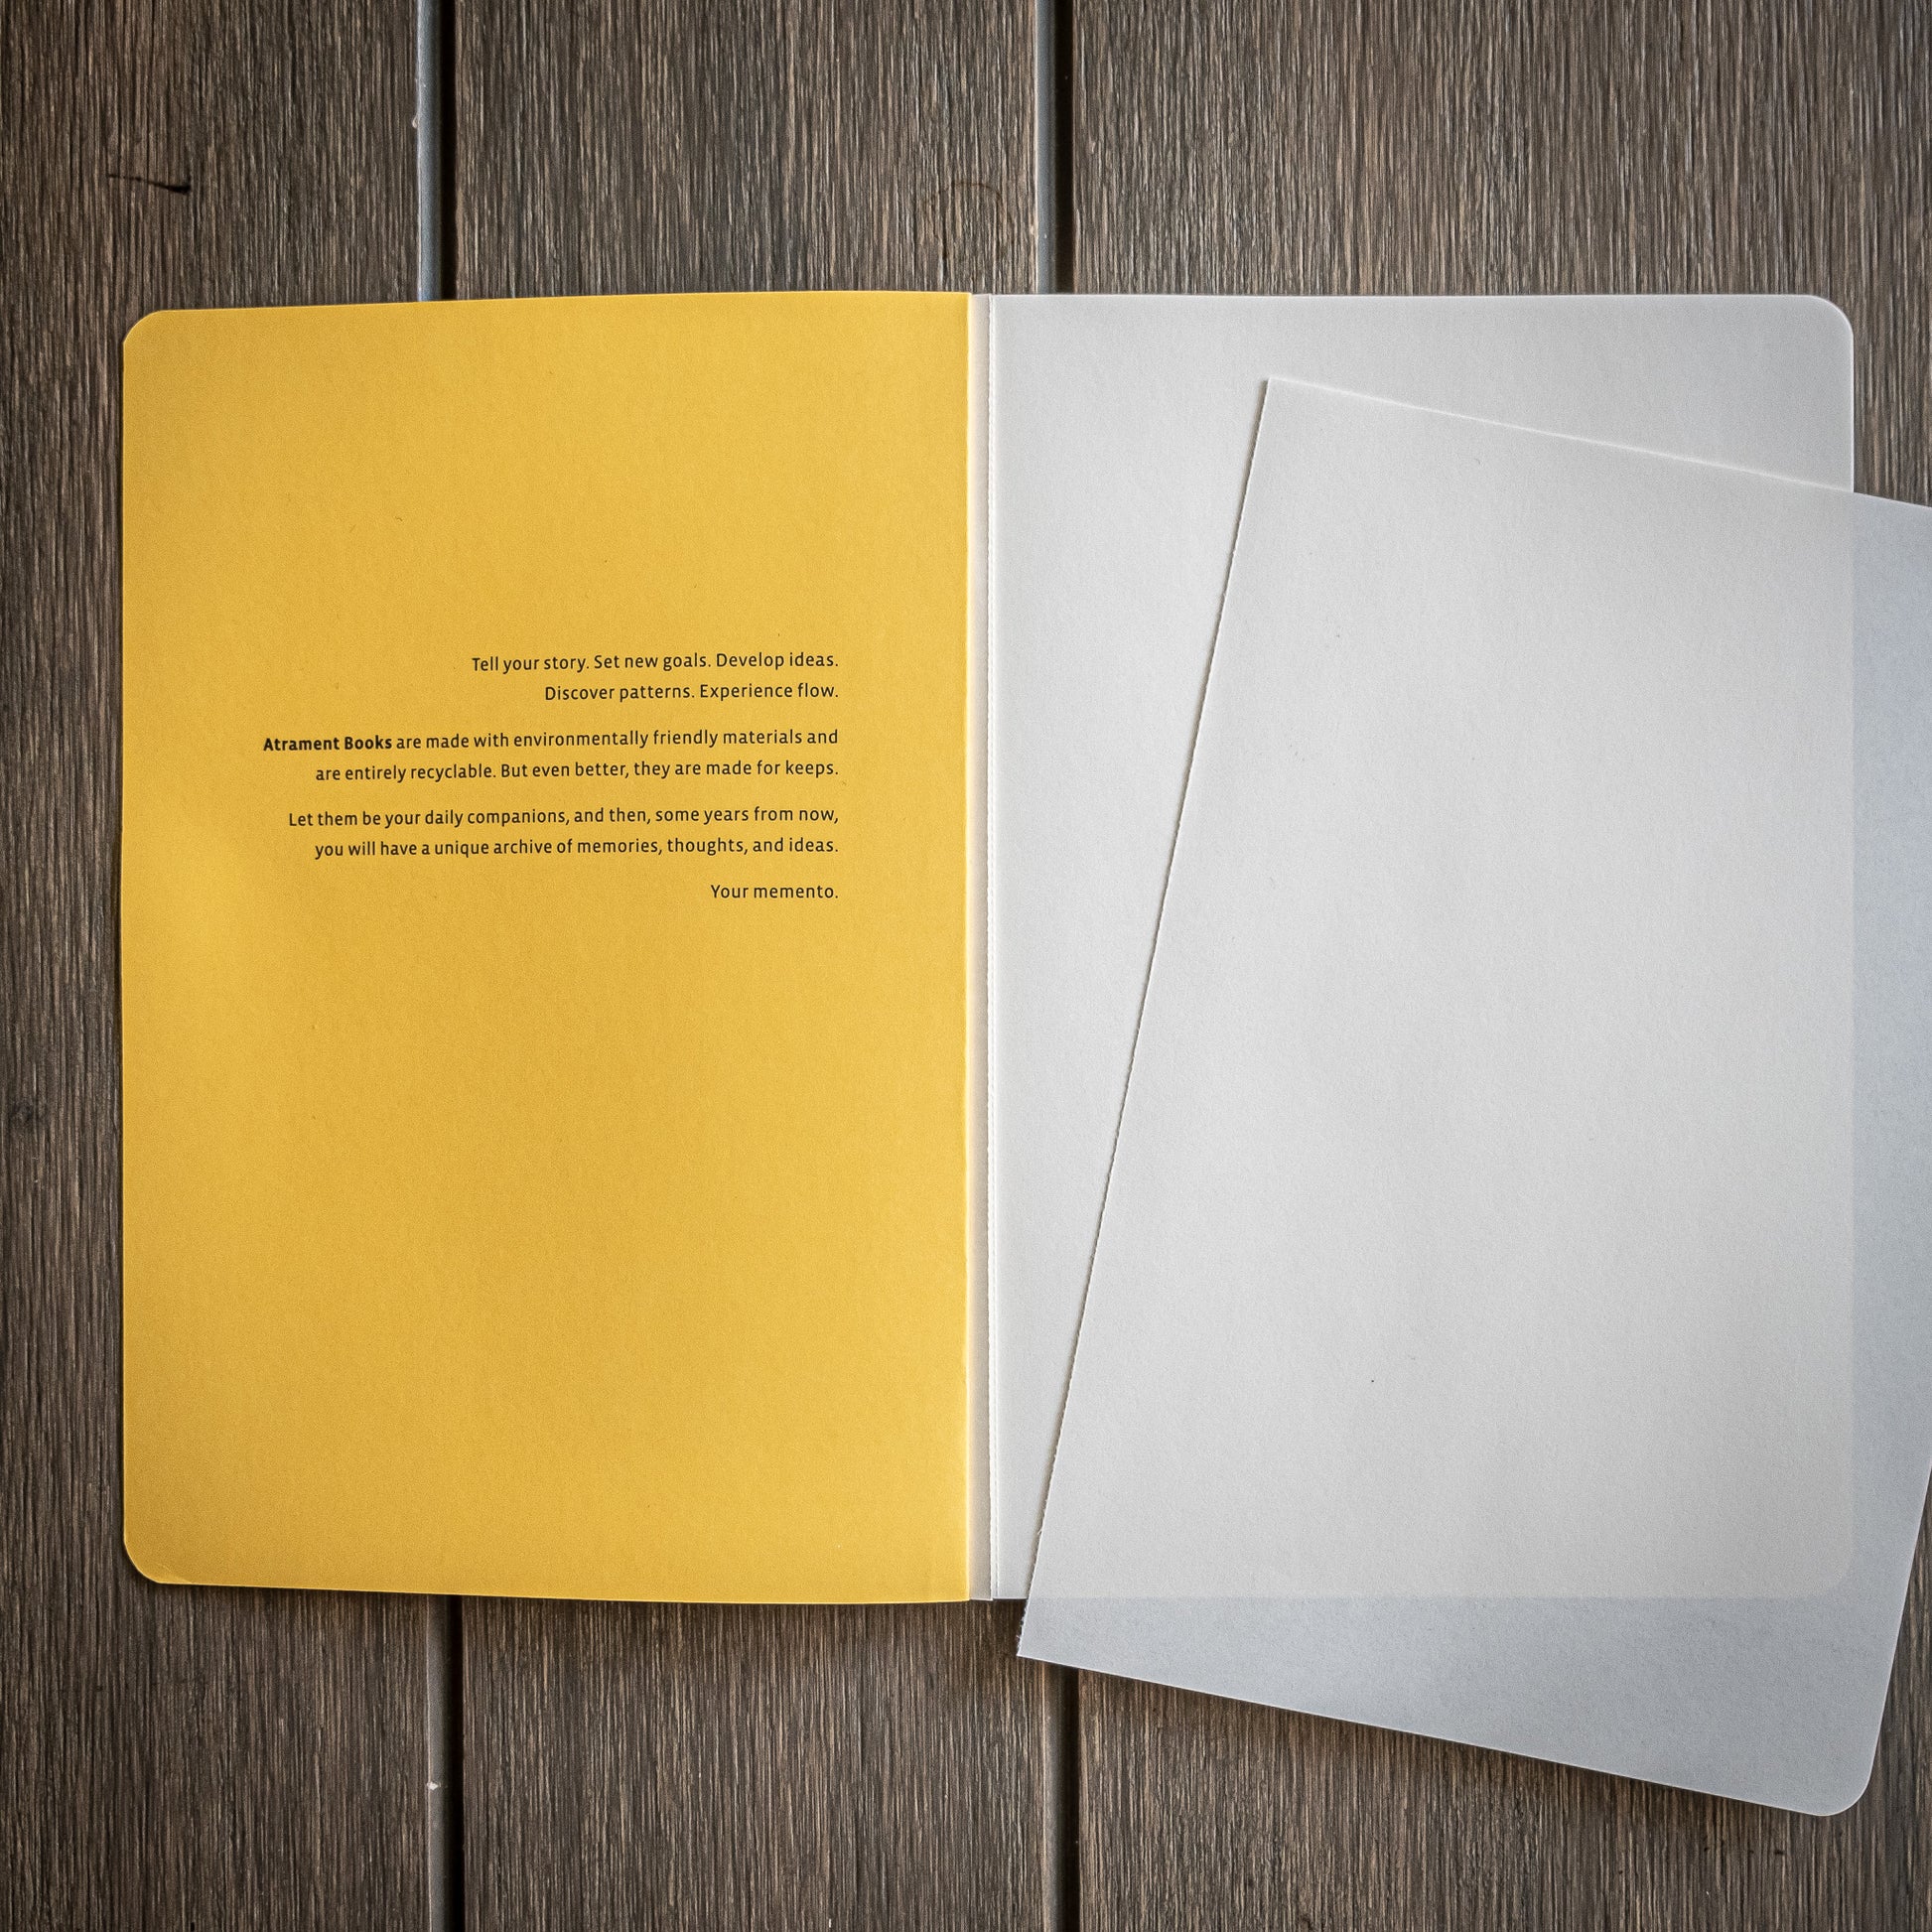 Atrament Sketchbook with blank tear-off sheets for sketching, drawing, or freehand doodling.